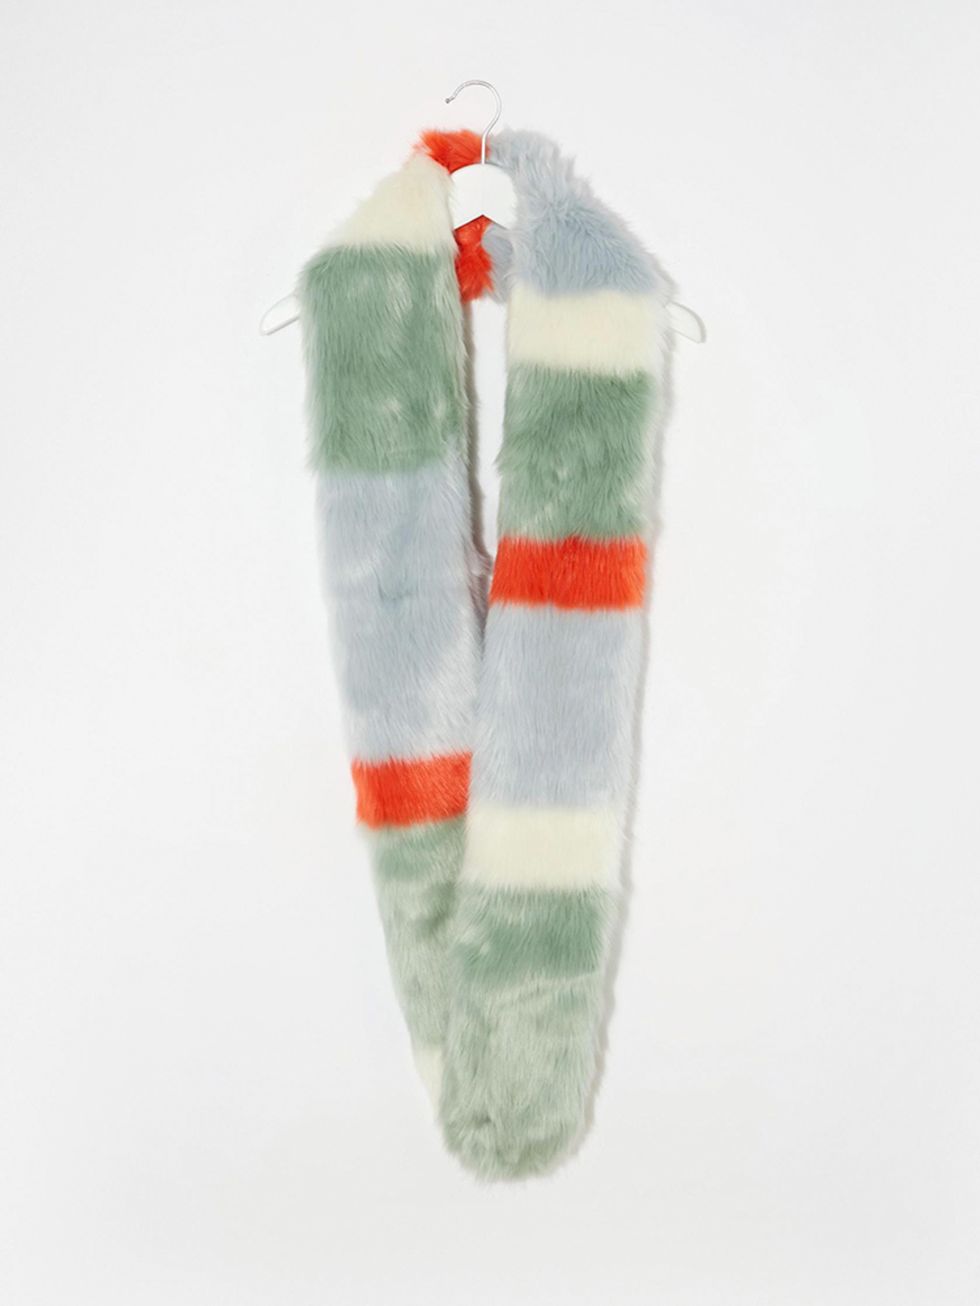 <p><a href="http://www.asos.com/asos/asos-bright-multi-stripe-fur-scarf/prod/pgeproduct.aspx?iid=5009641&clr=Multi&SearchQuery=fur+scarf&pgesize=37&pge=0&totalstyles=37&gridsize=3&gridrow=9&gridcolumn=1" target="_blank">ASOS scarf</a>, £30</p>